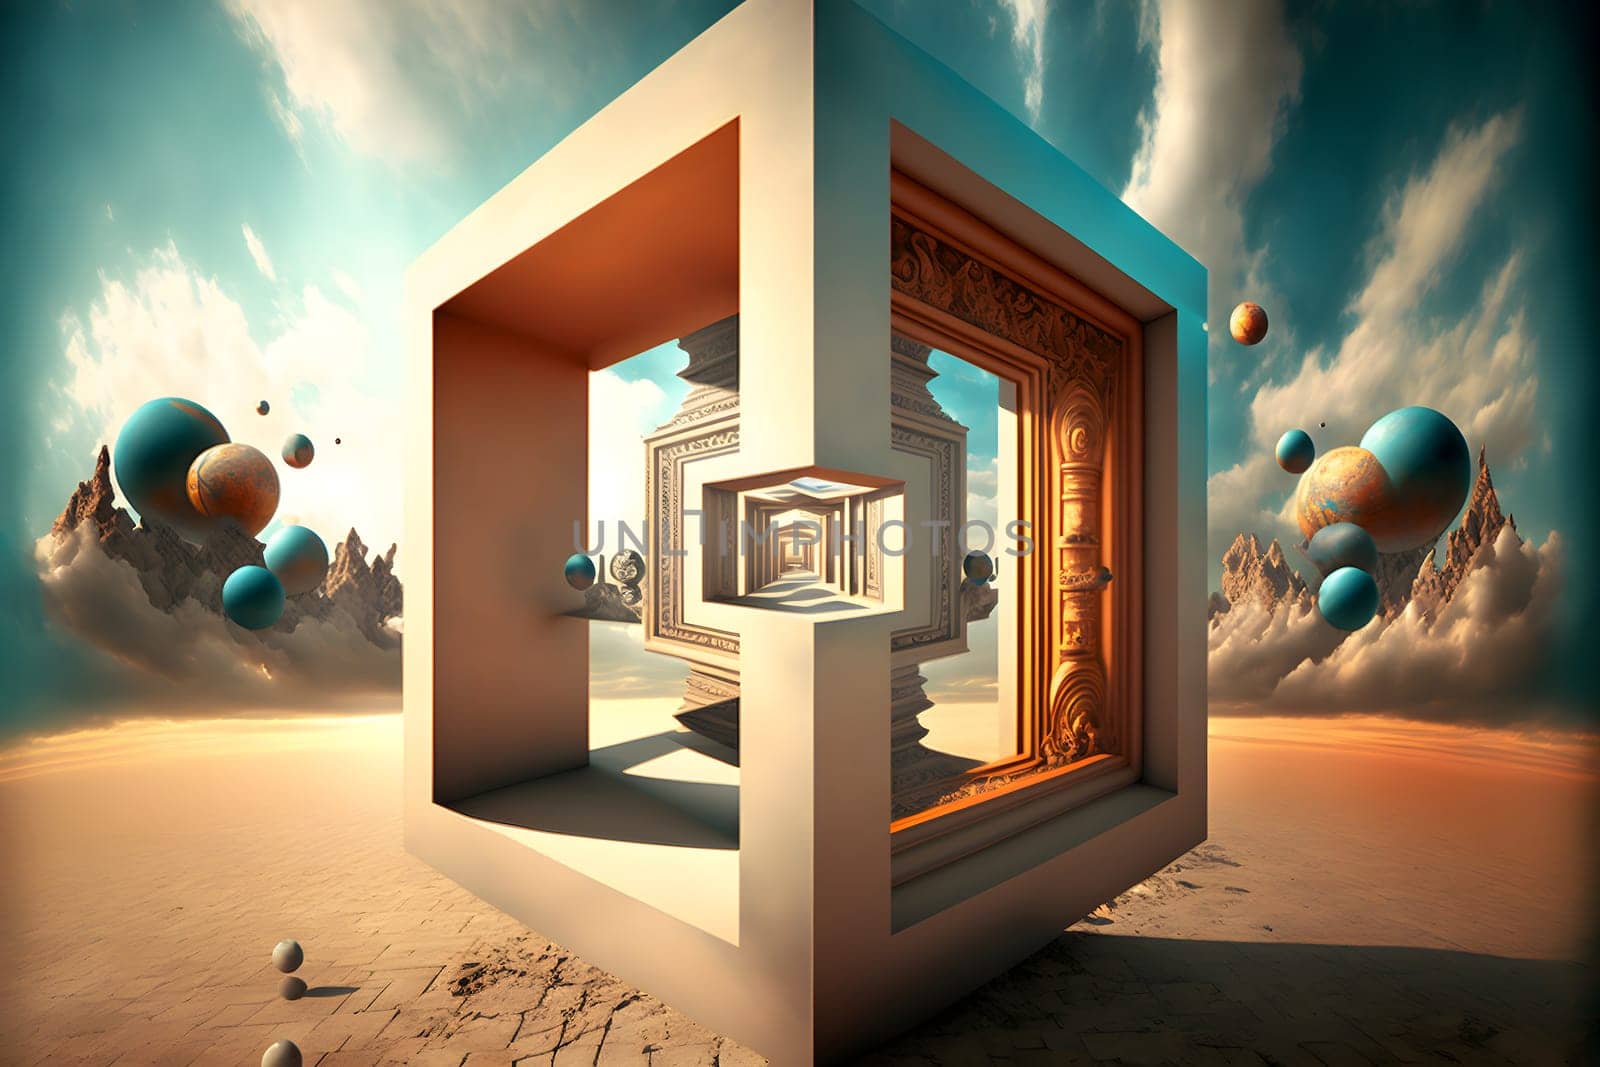 abstract cuboid visualisation of multi-dimensional space on sand of desert at day time, neural network generated art. Digitally generated image. Not based on any actual person, scene or pattern.